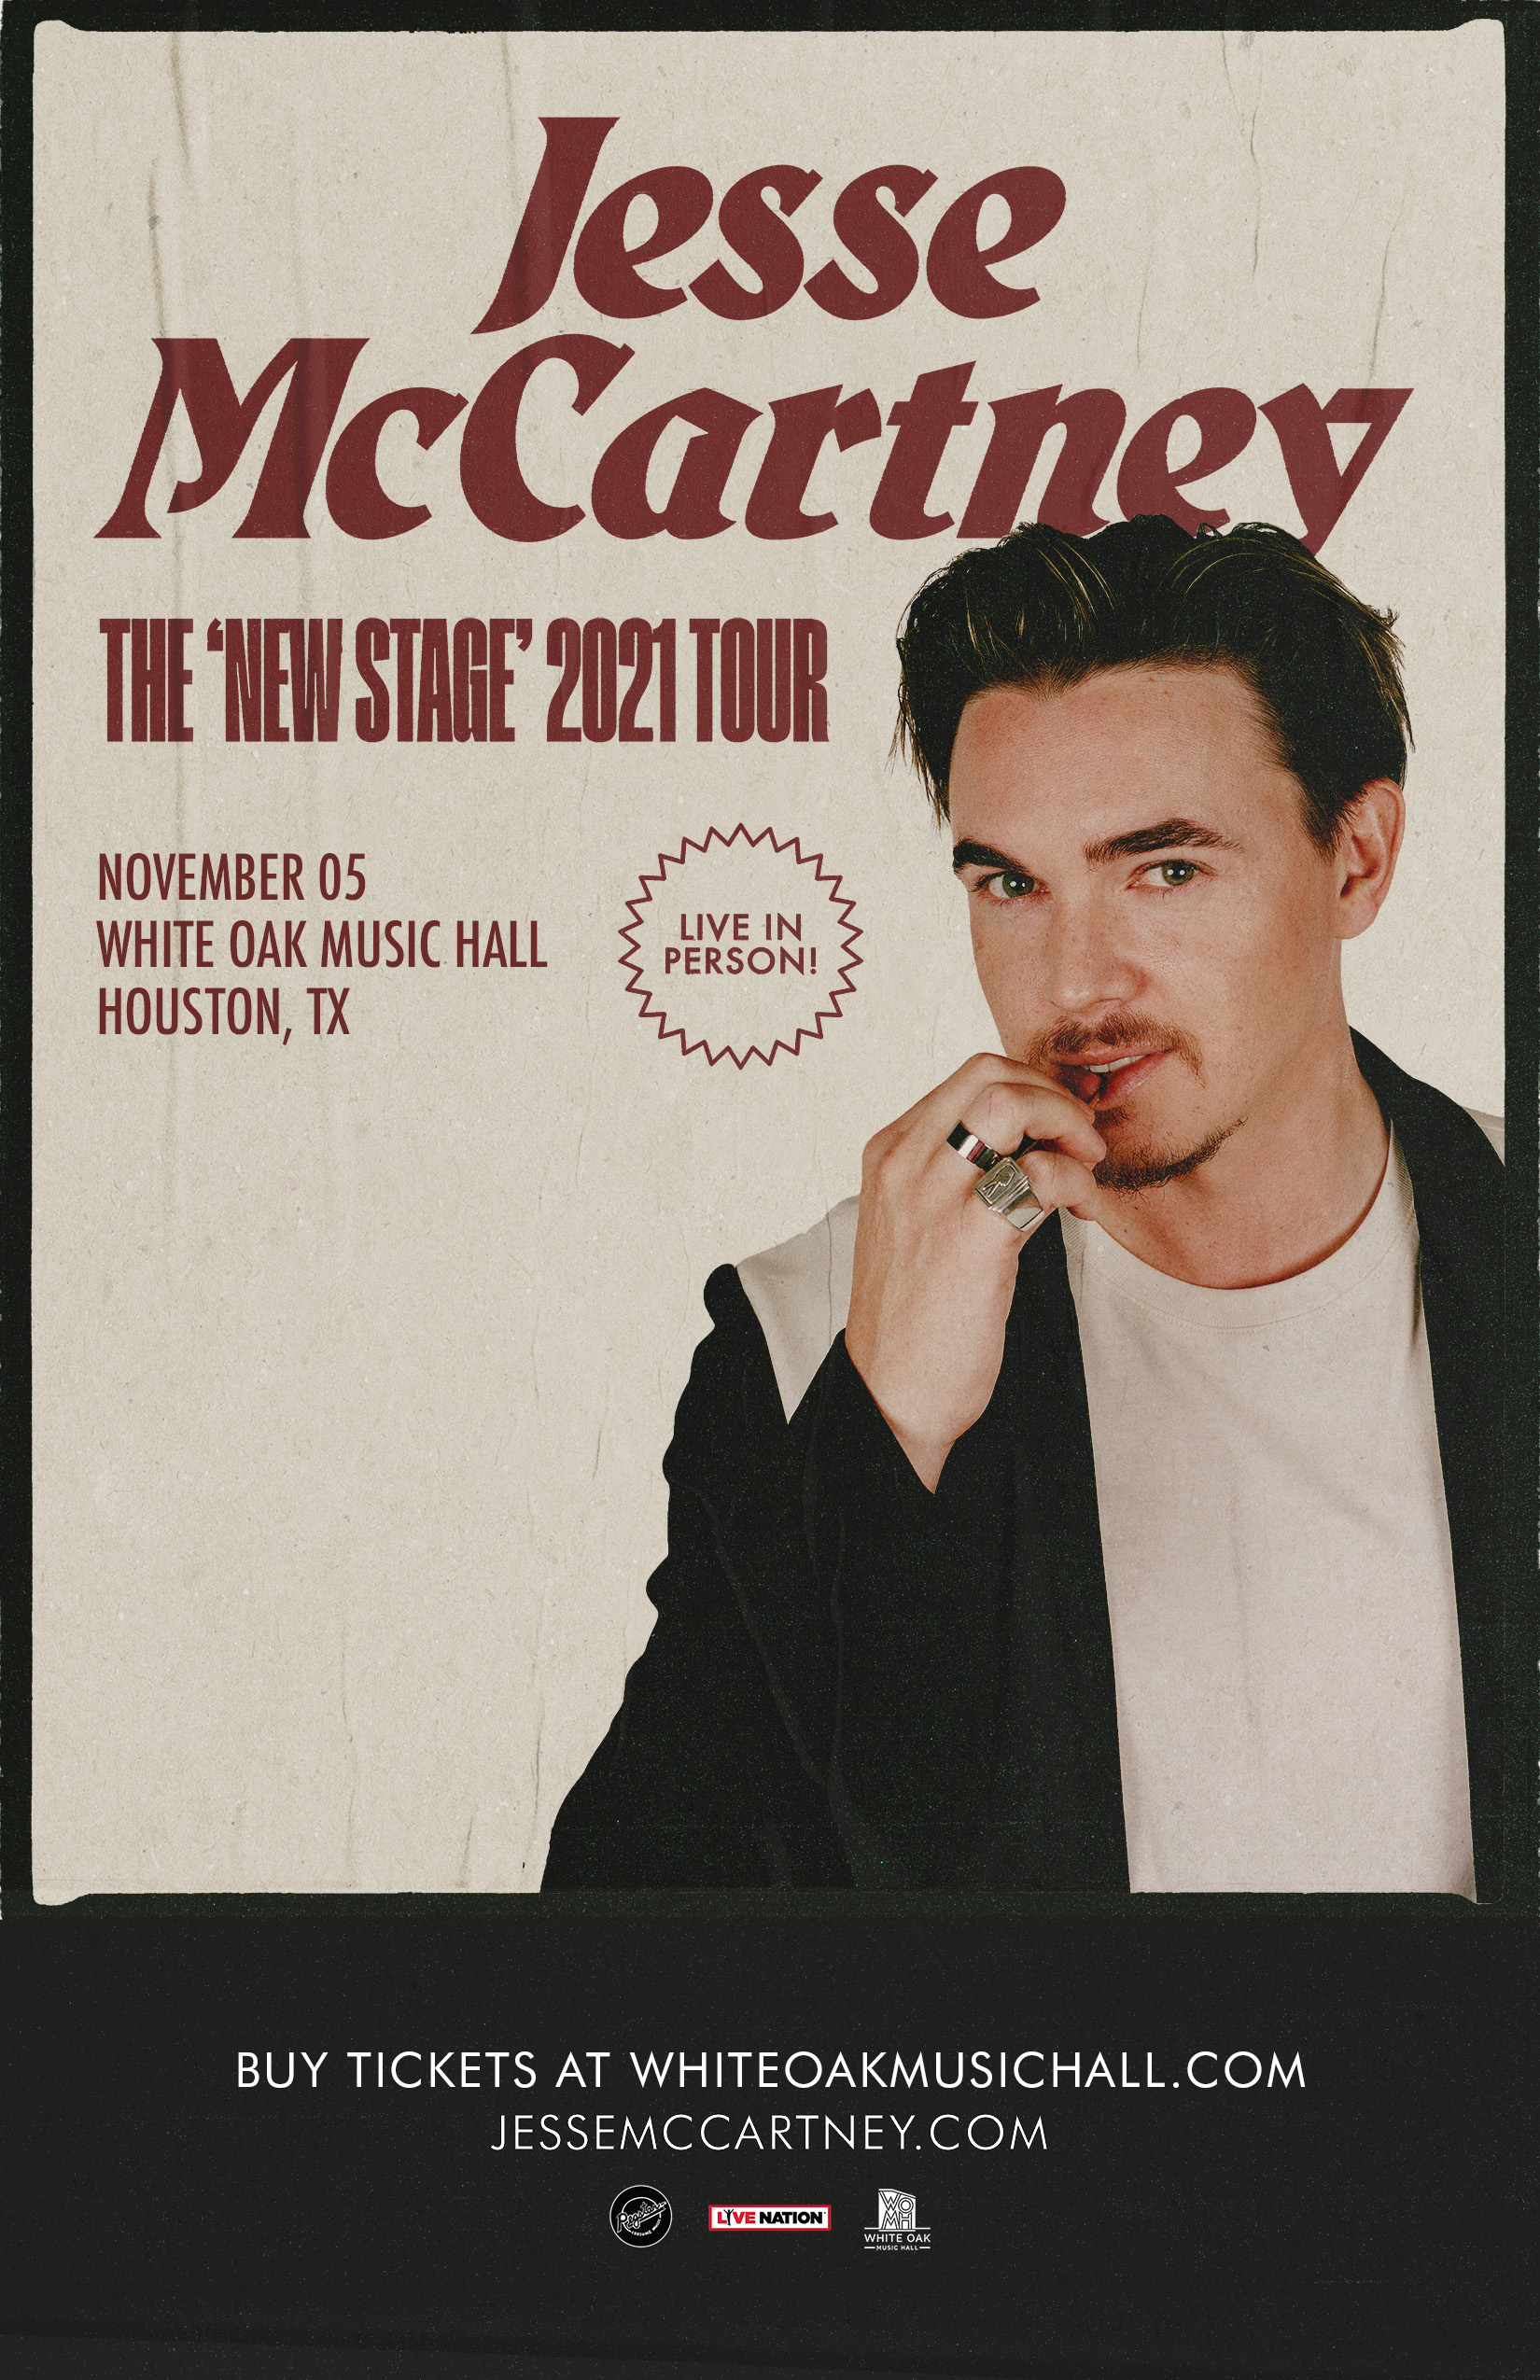 Buy Tickets to Jesse McCartney The ‘New Stage’ 2021 Tour in Houston